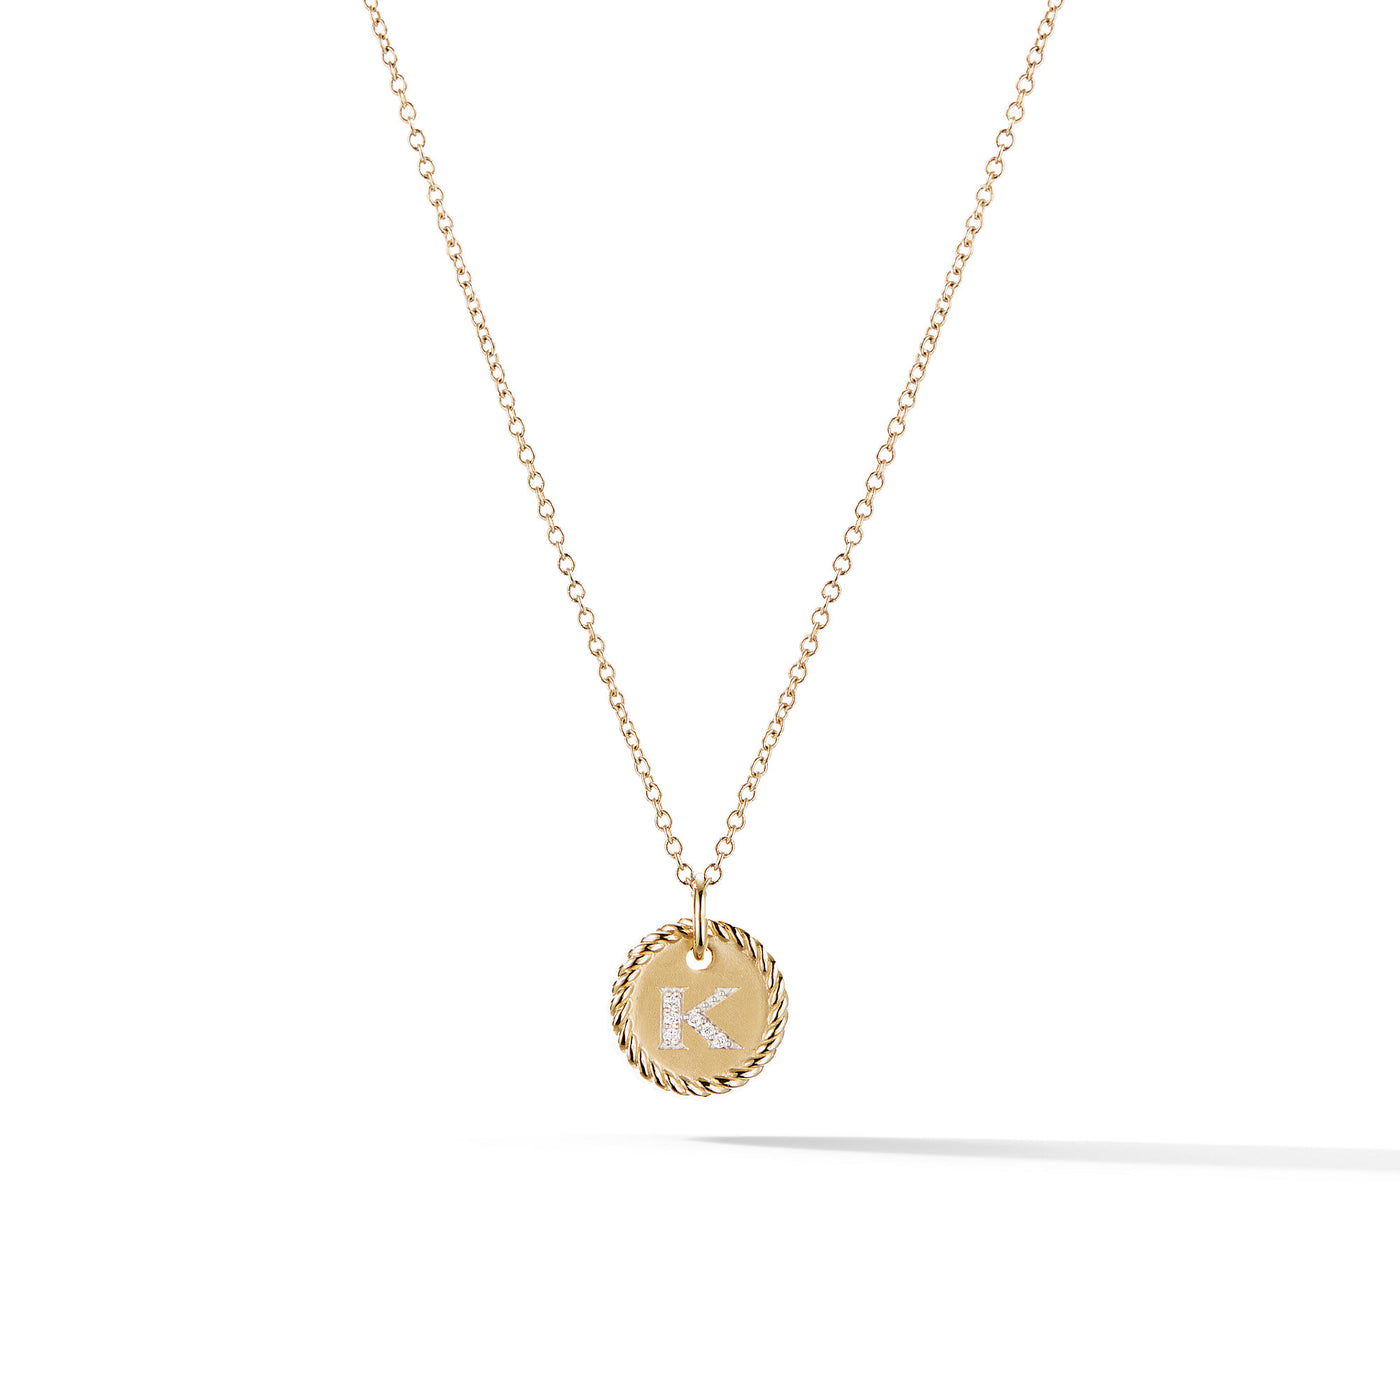 Initial Charm Necklace in 18K Yellow Gold with Diamond K